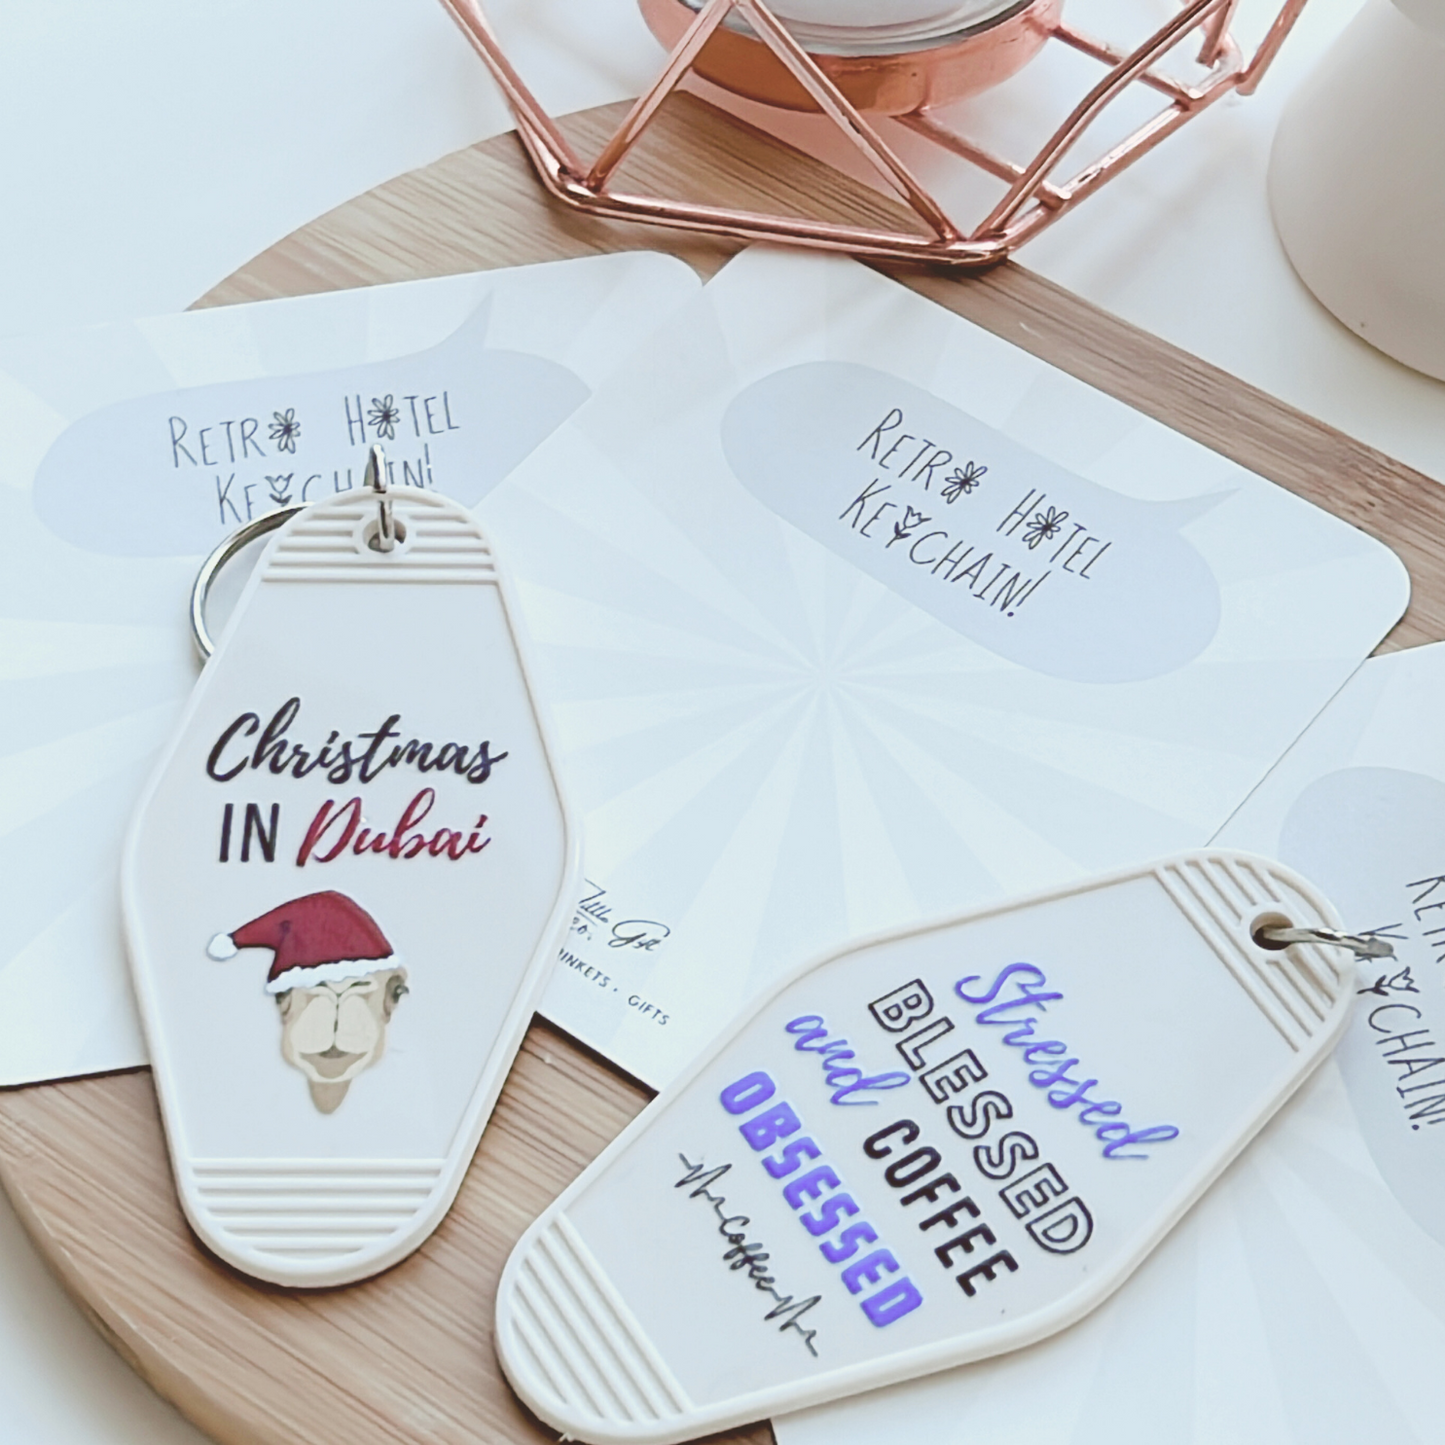 Retro Hotel Key Ring | Christmas in Dubai, Stressed bless and coffee obsessed!